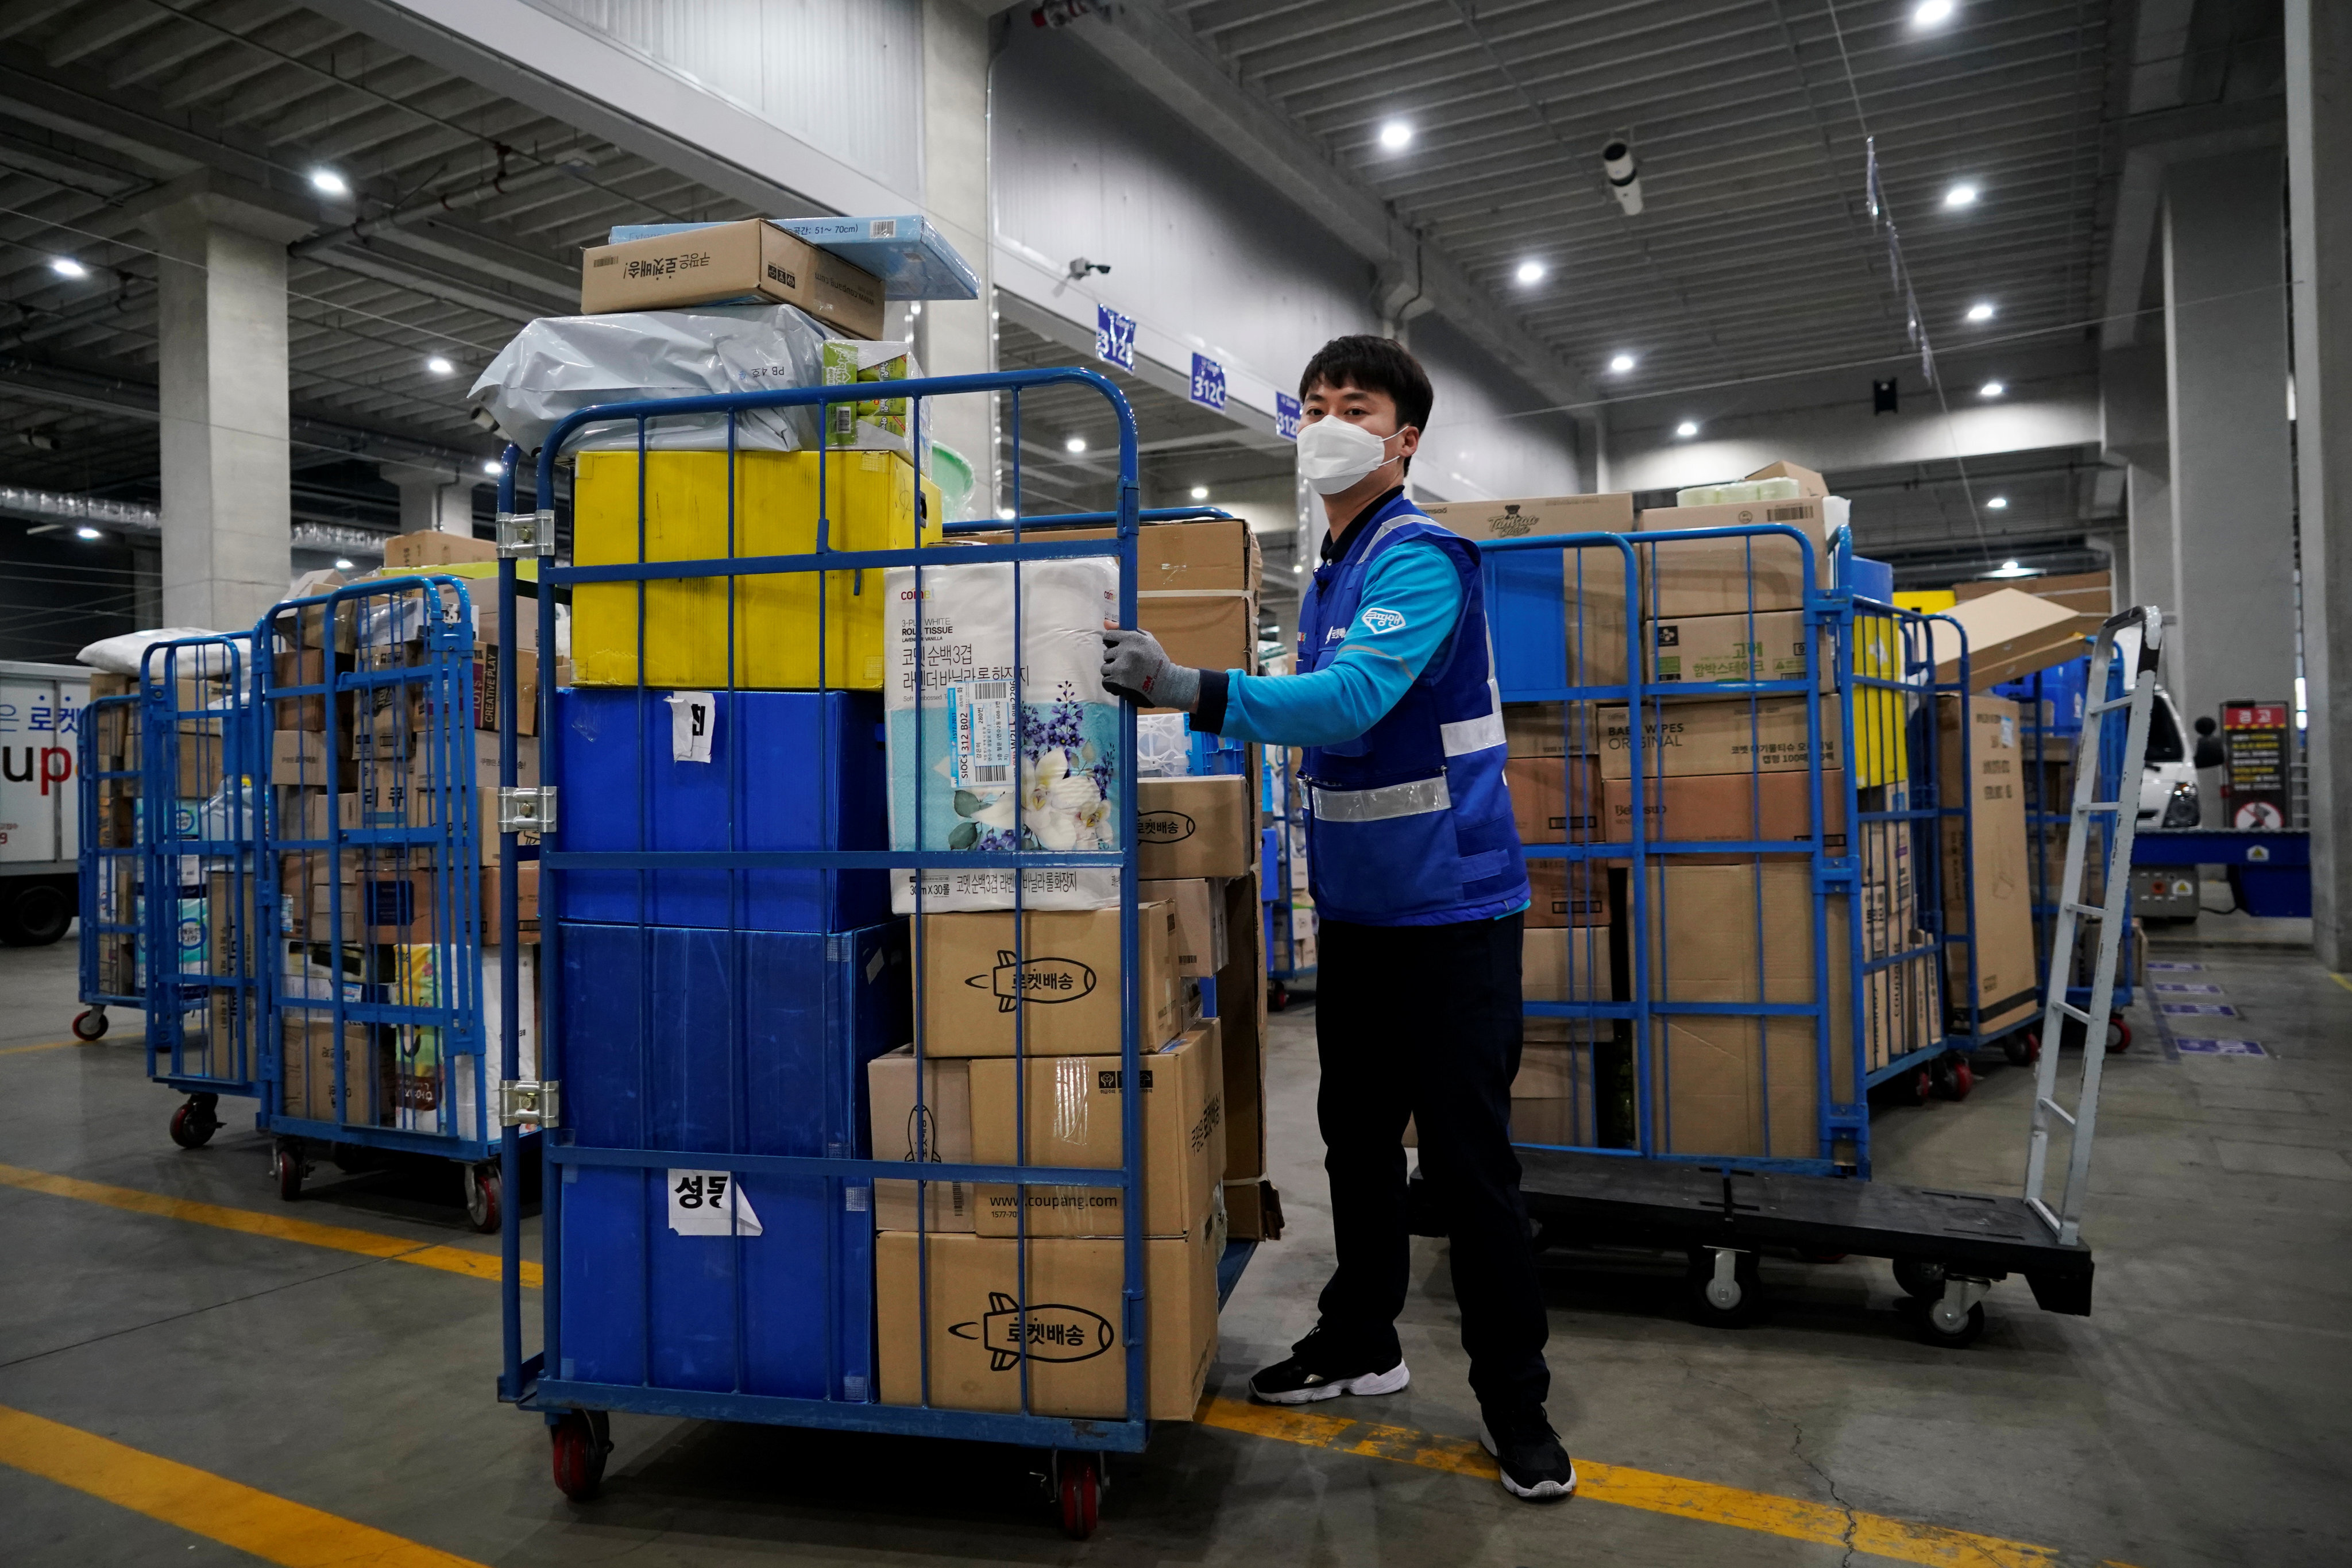 A delivery man for Coupang Jung Im-hong loads packages before leaving to deliver them in Incheon, South Korea. Photo: Reuters